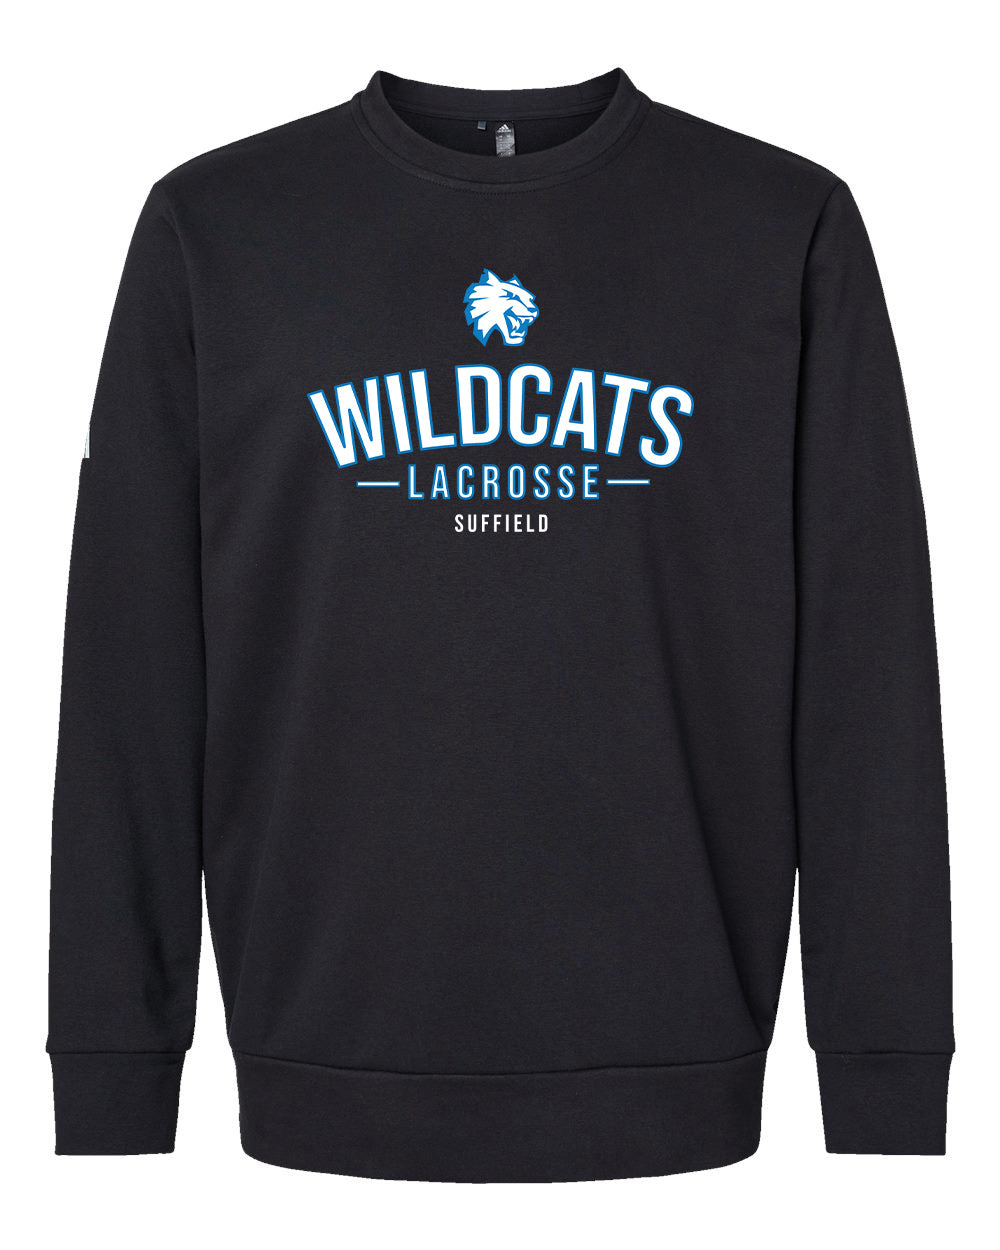 Suffield Youth Lacrosse - Adult Adidas Crewneck "Classic" - A434 (color options available)